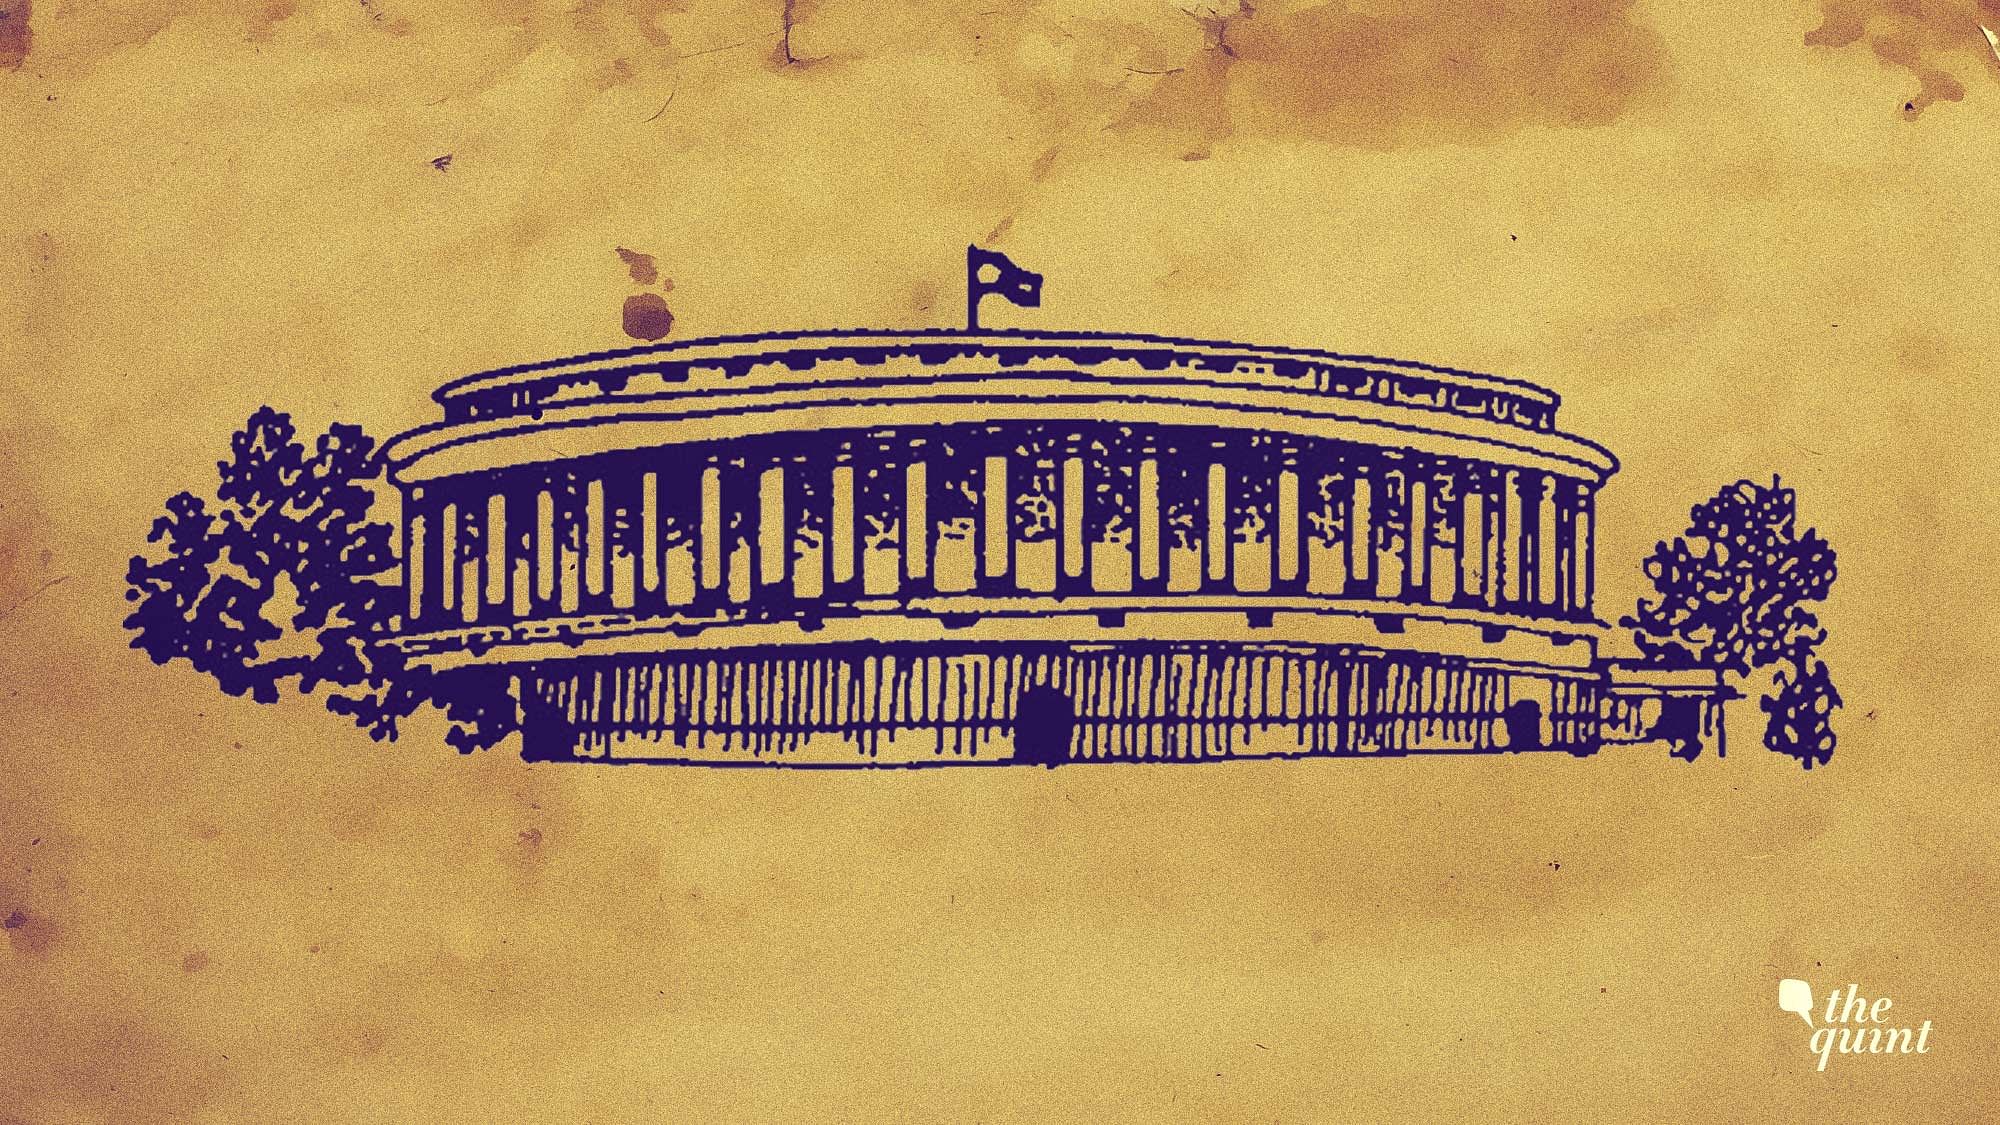 Image of the Parliament used for representational purposes.